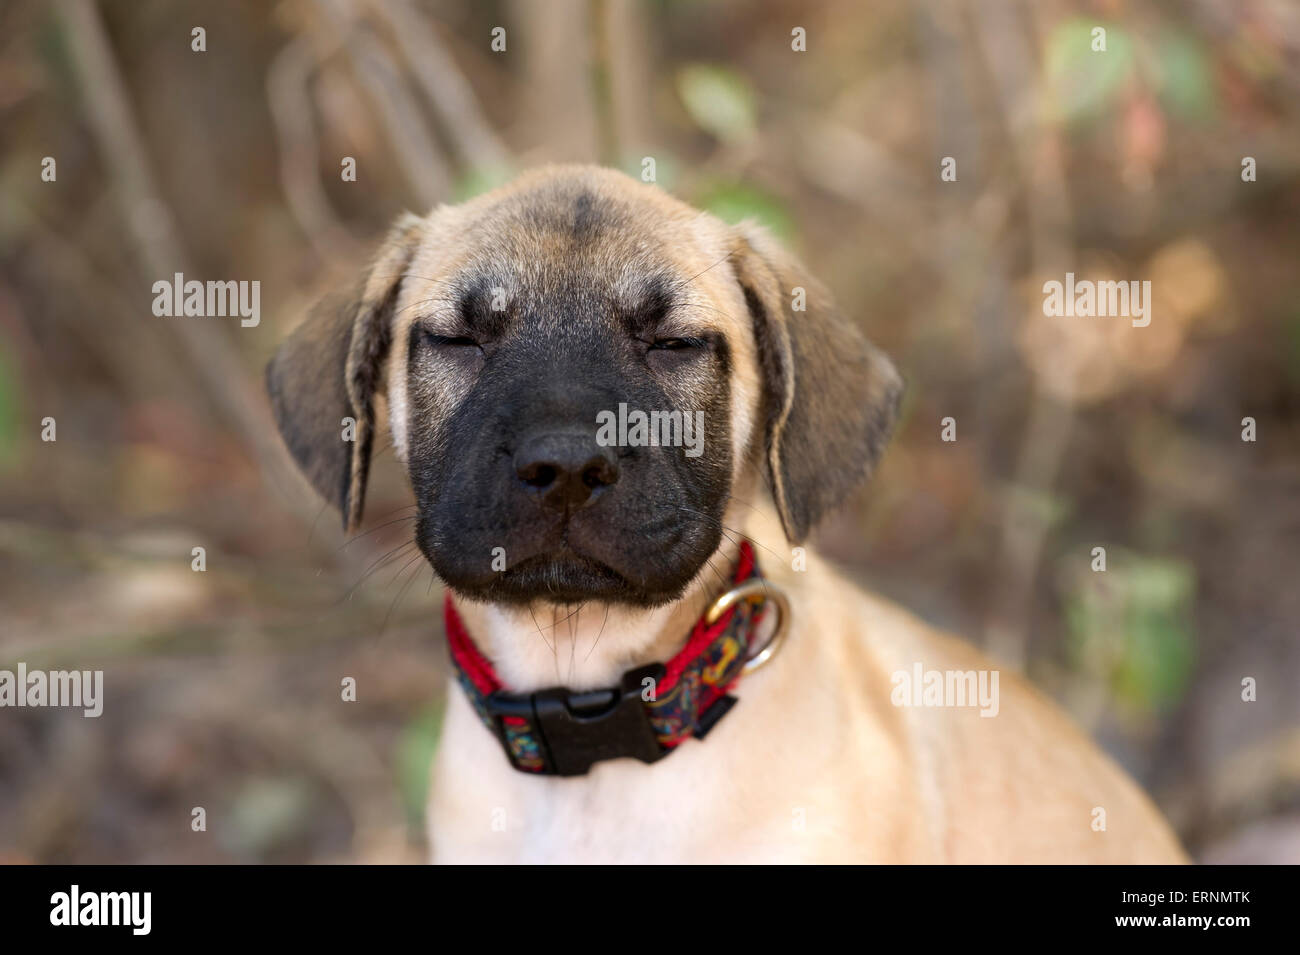 Funny puppy has his eyes half closed outdoors. Stock Photo